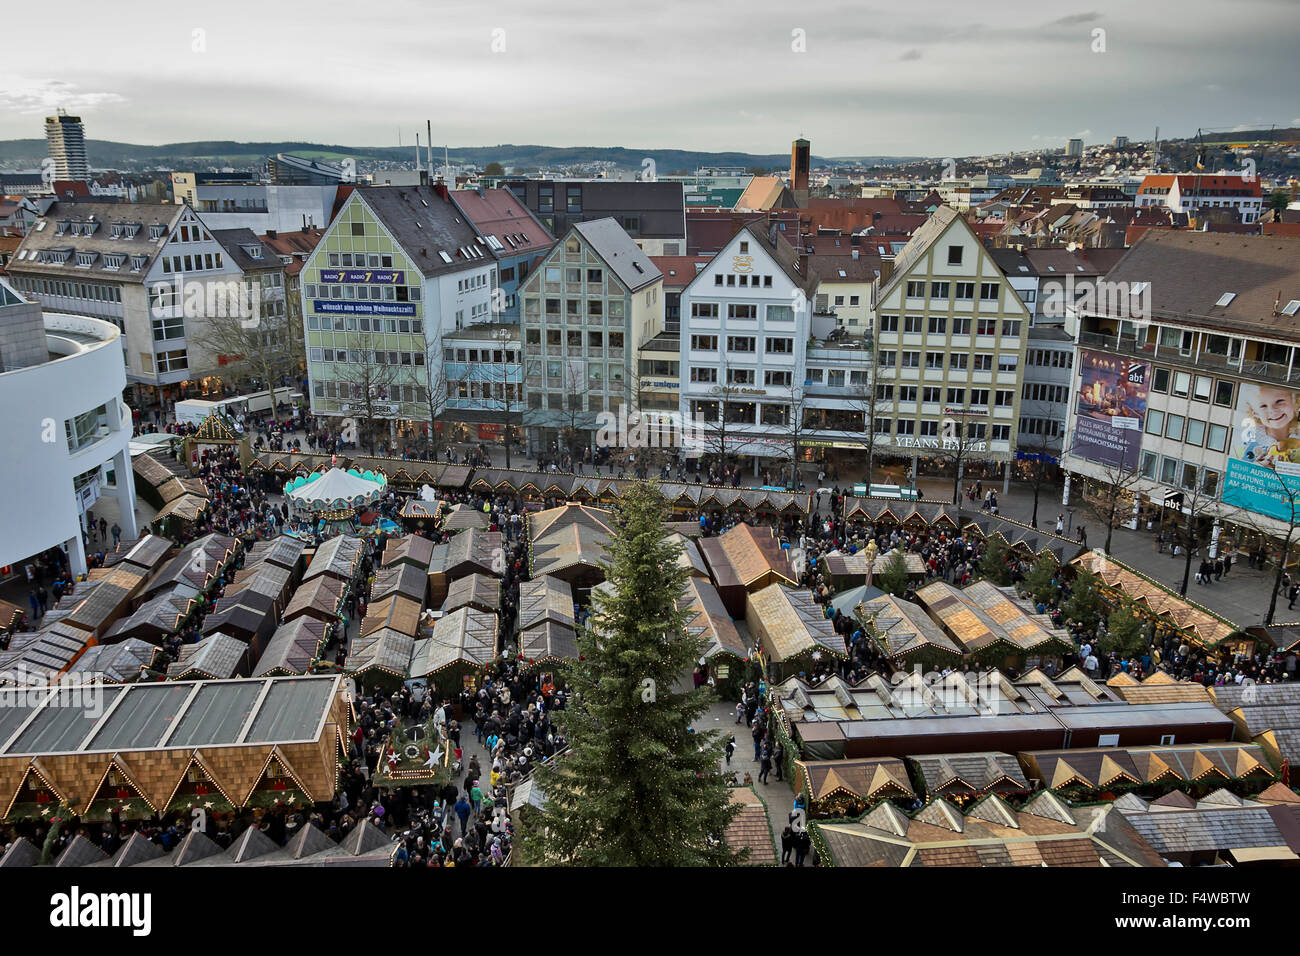 The Christmas market of Ulm, Germany, as seen as from the Minster on December 13th, 2014. Stock Photo